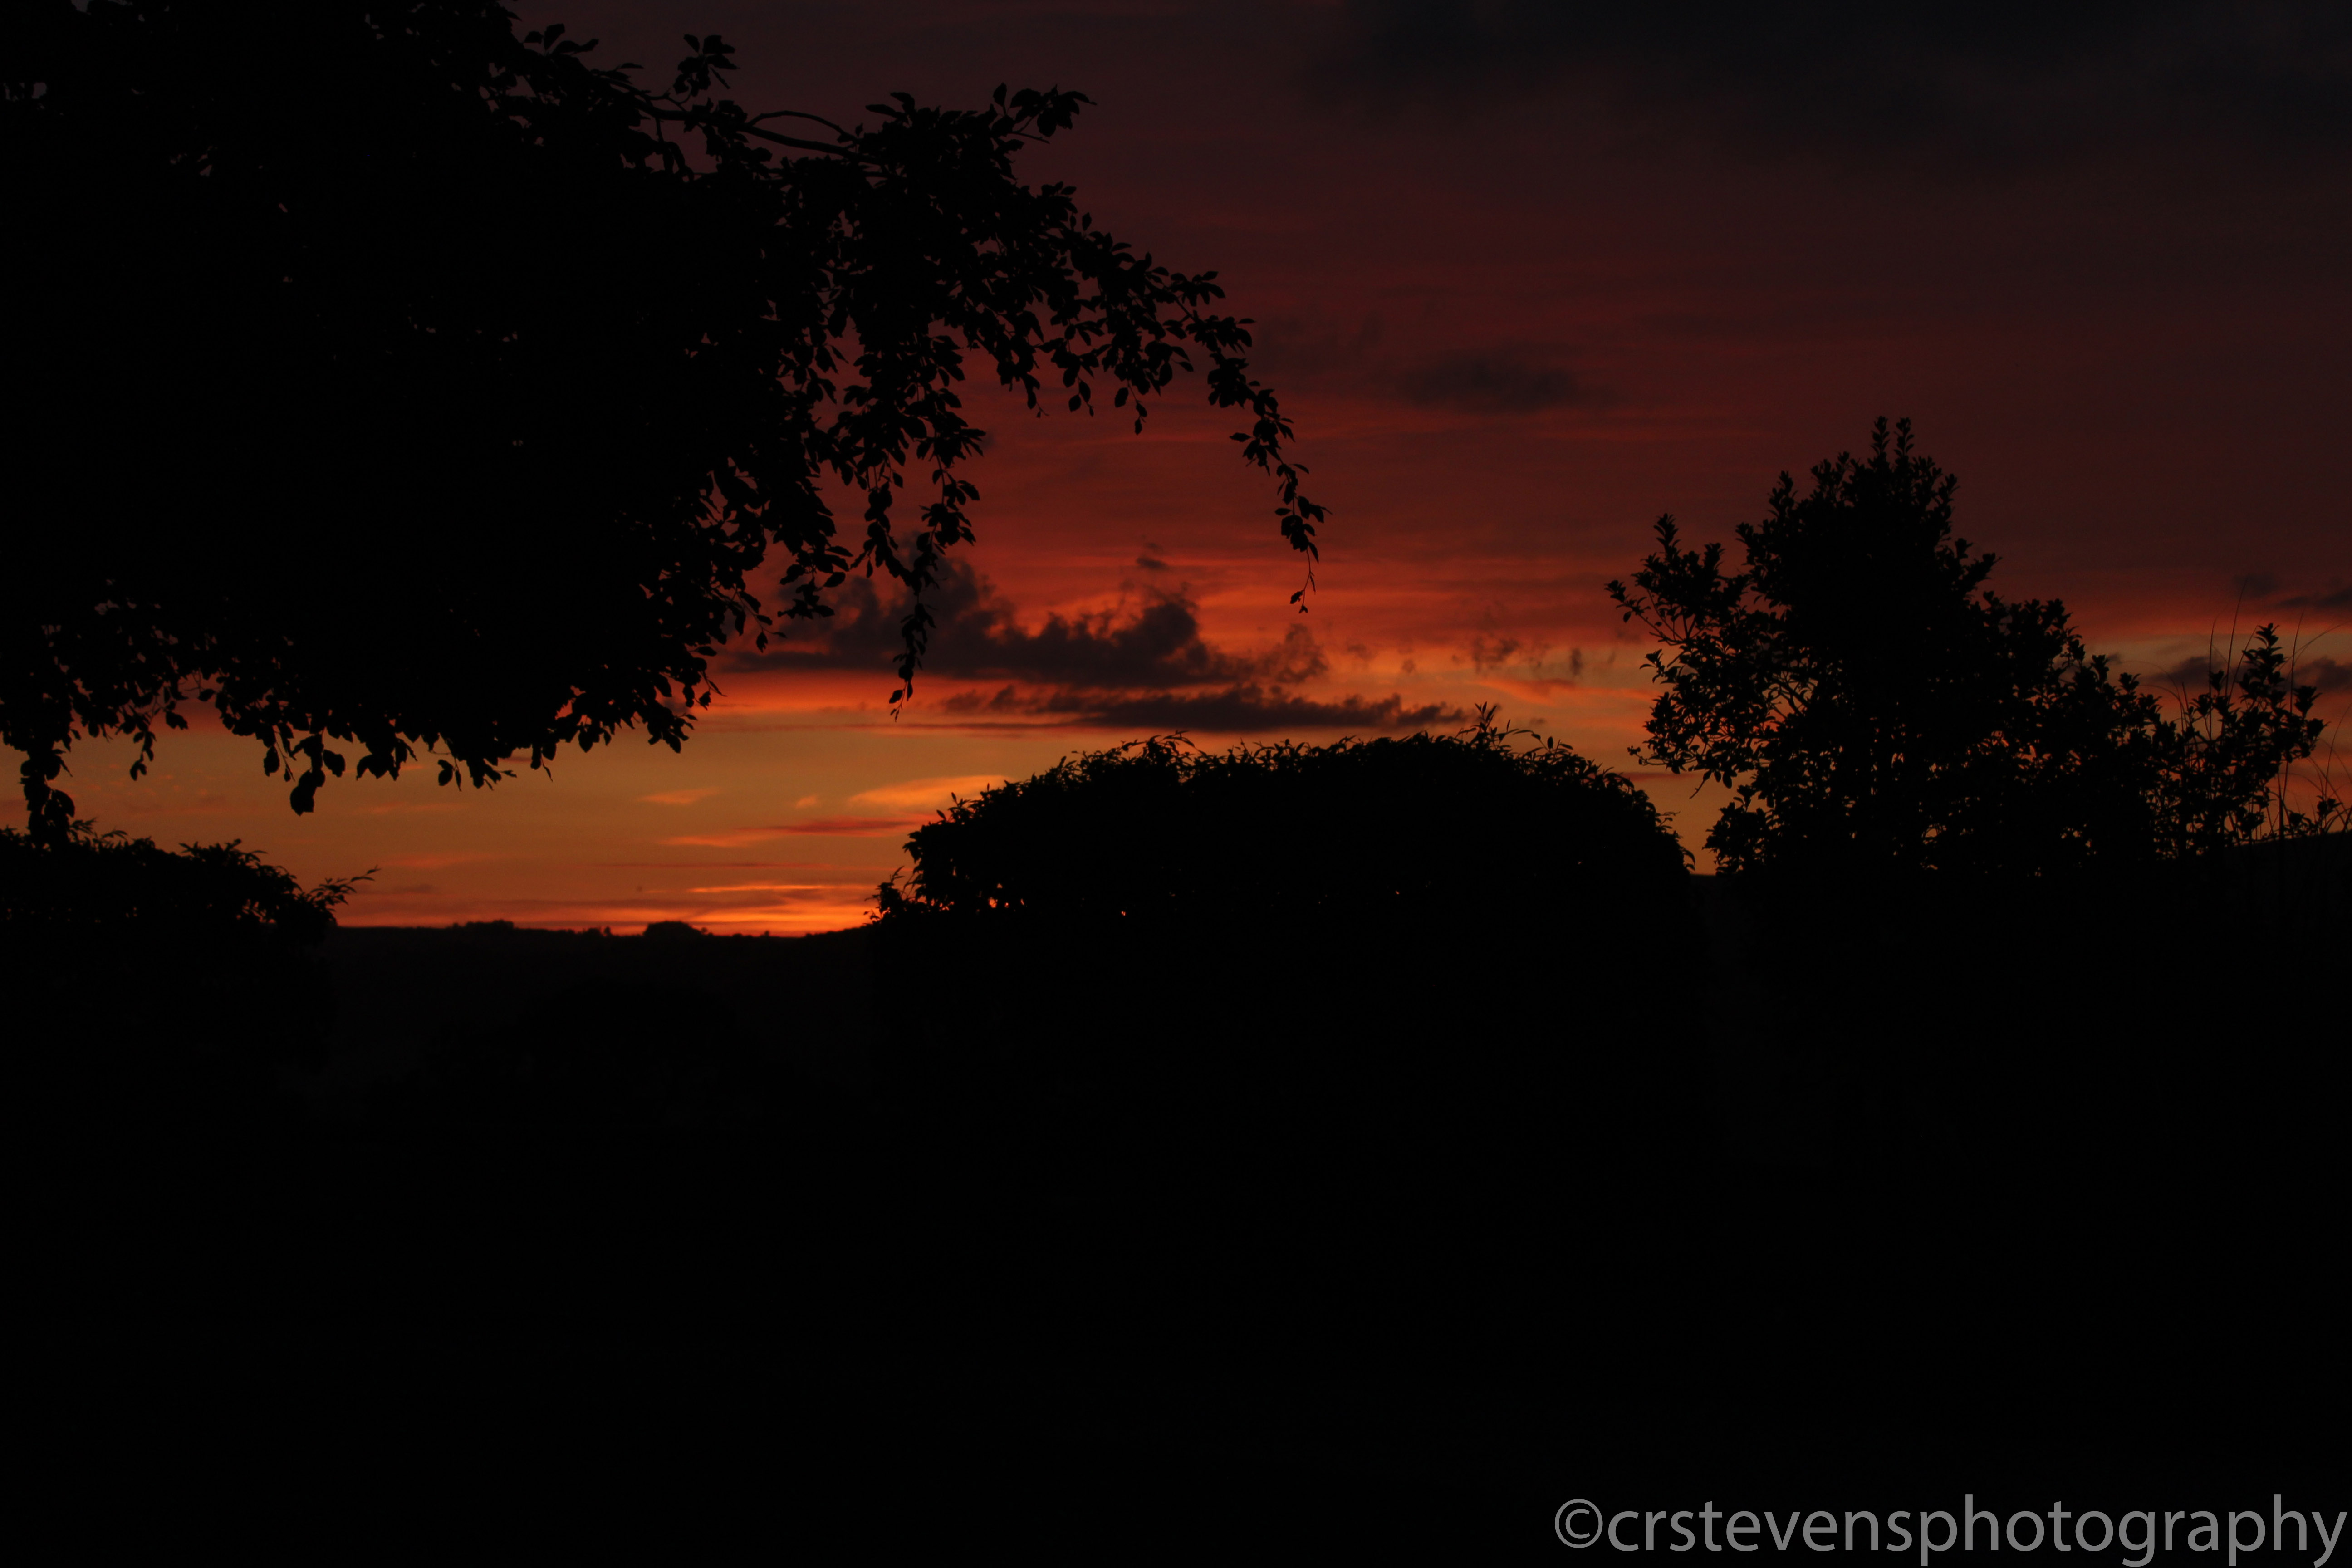 some bushes silhouetted against a red and orange sky at sunset